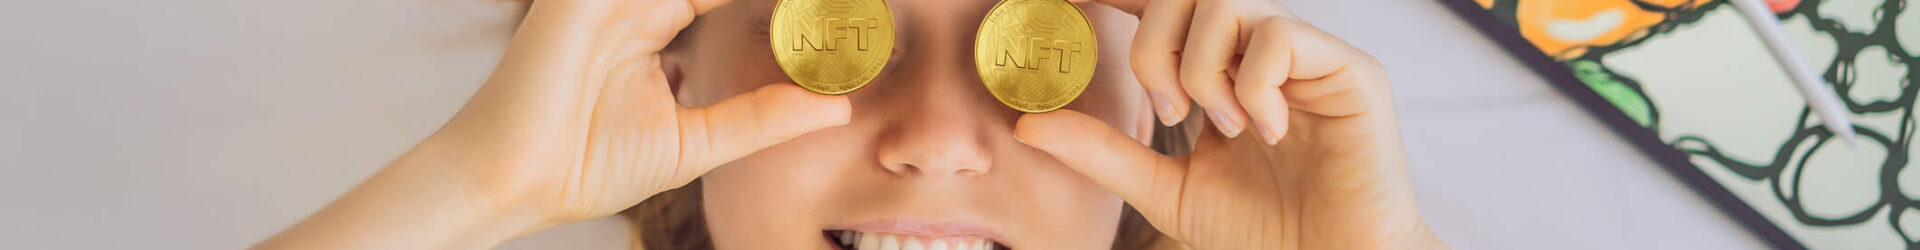 nfts and taxes